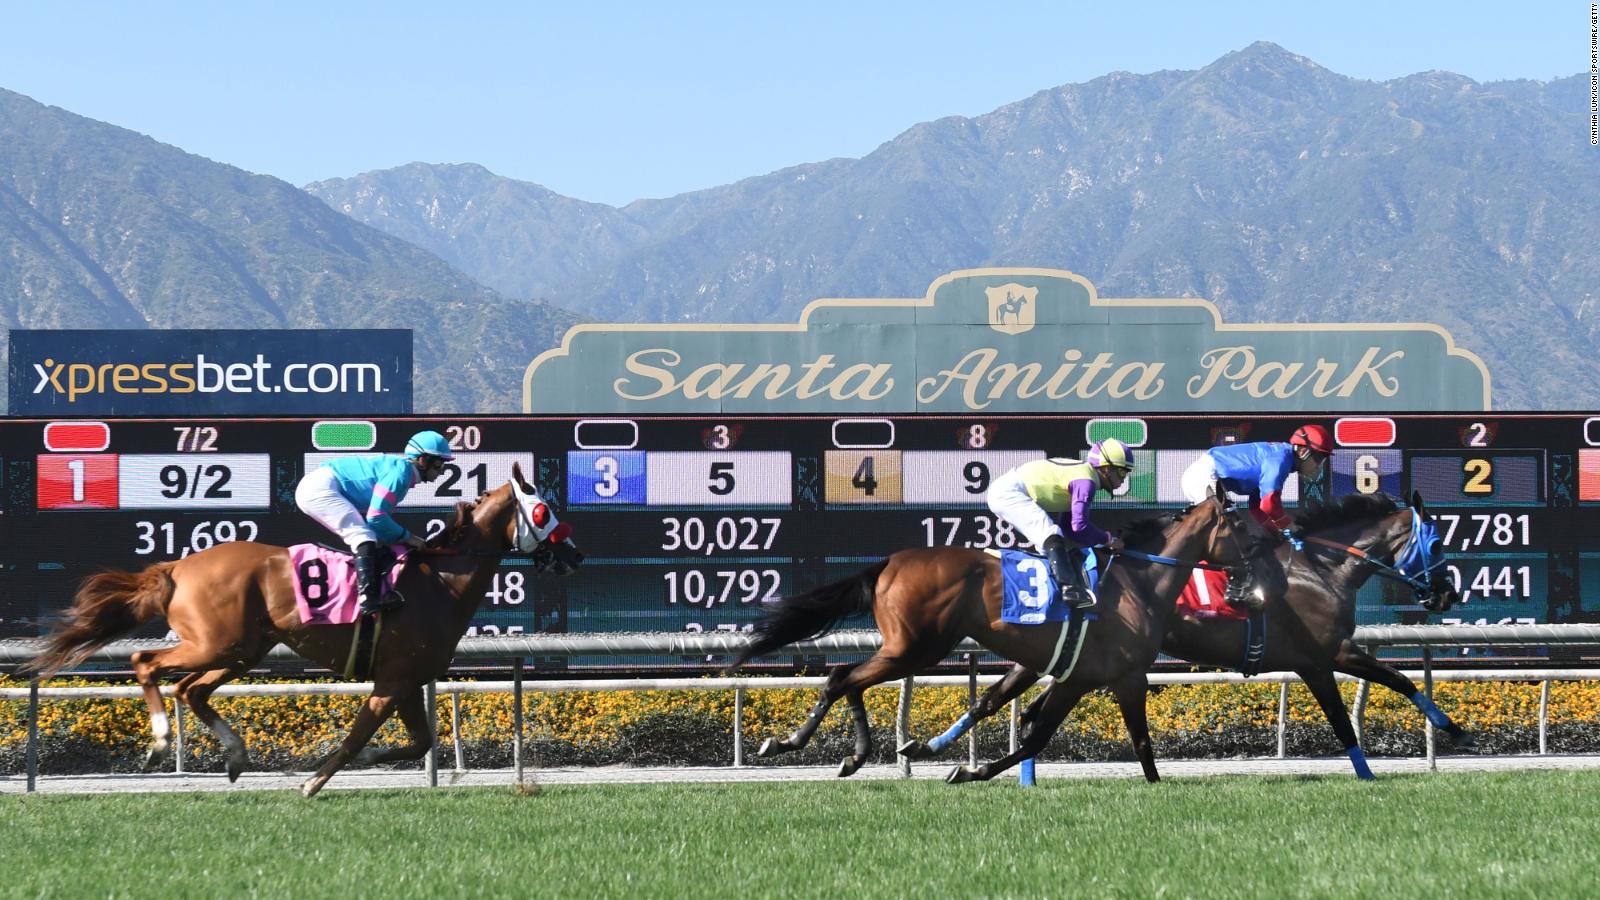 Breeders' Cup is going to stay at Santa Anita this year, despite